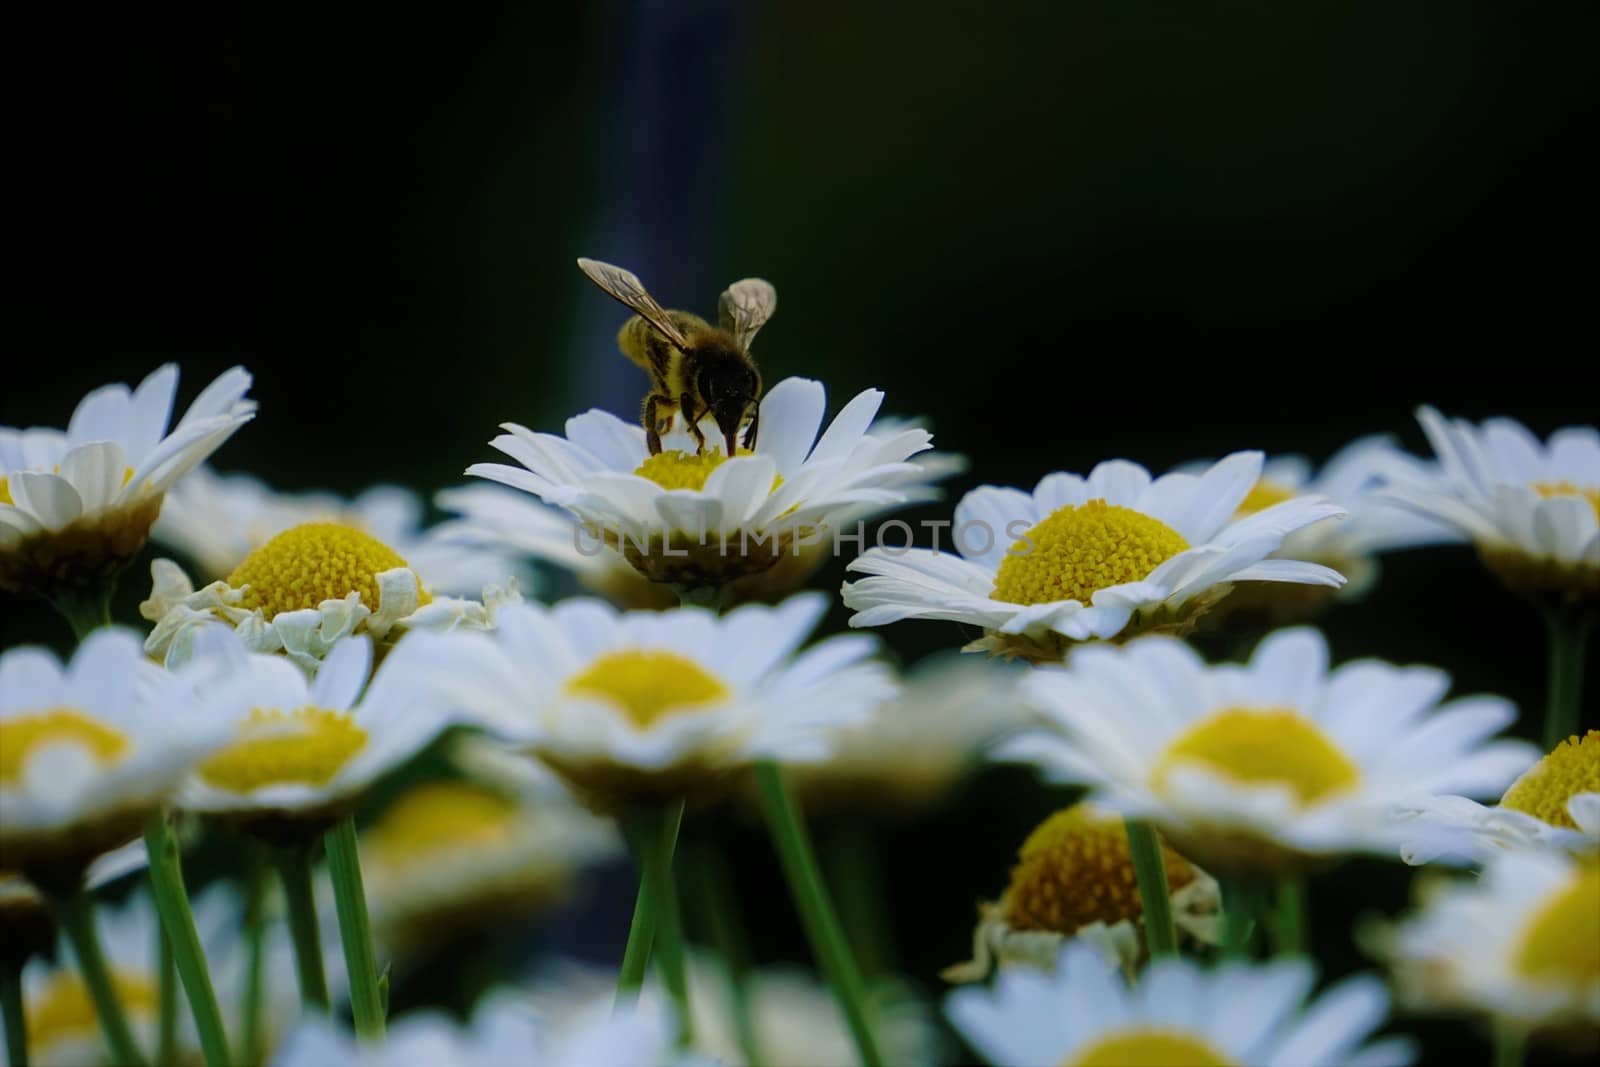 A bee on a Leucanthemum blossom collecting pollen